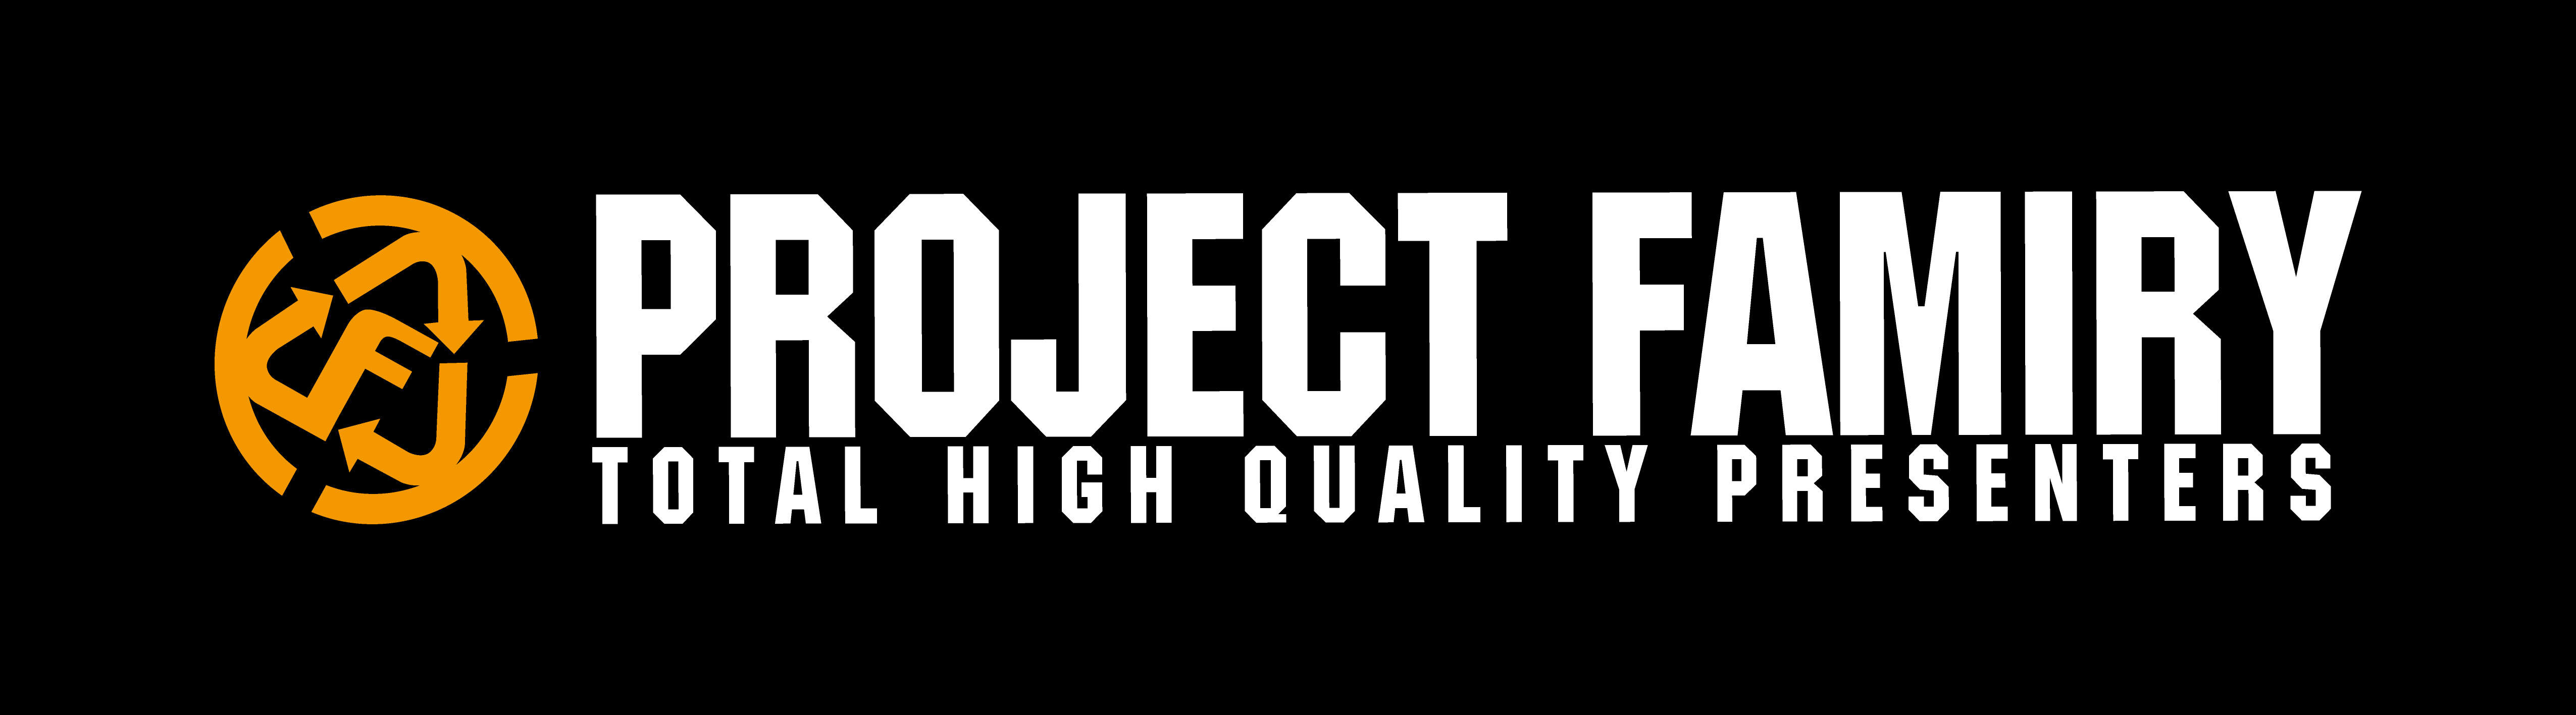 PROJECT FAMIRY